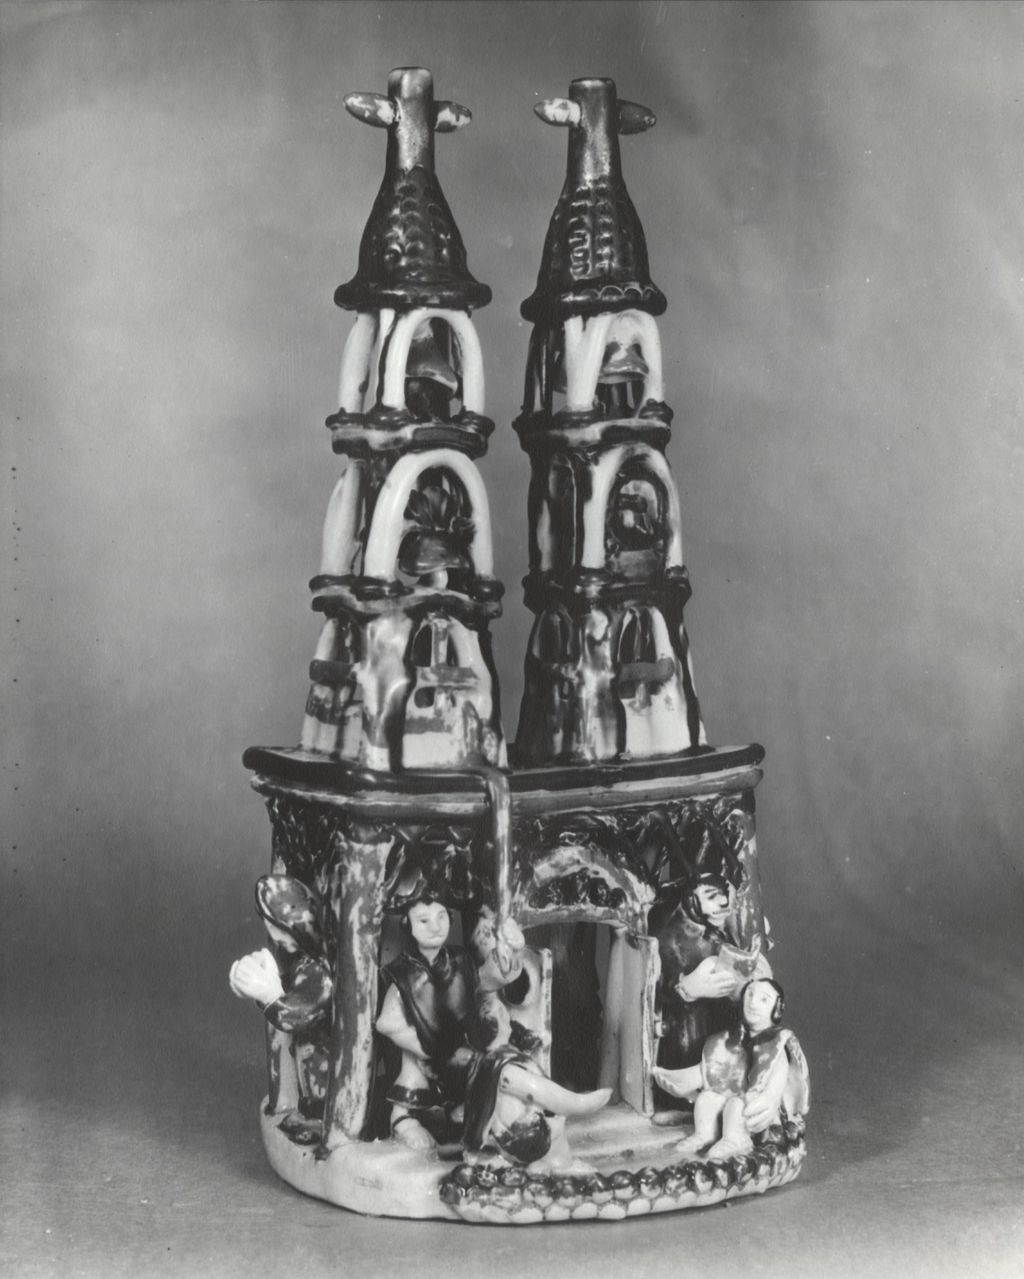 Miniature of Ceramic sculpture of a cathedral by Miguel Juárez